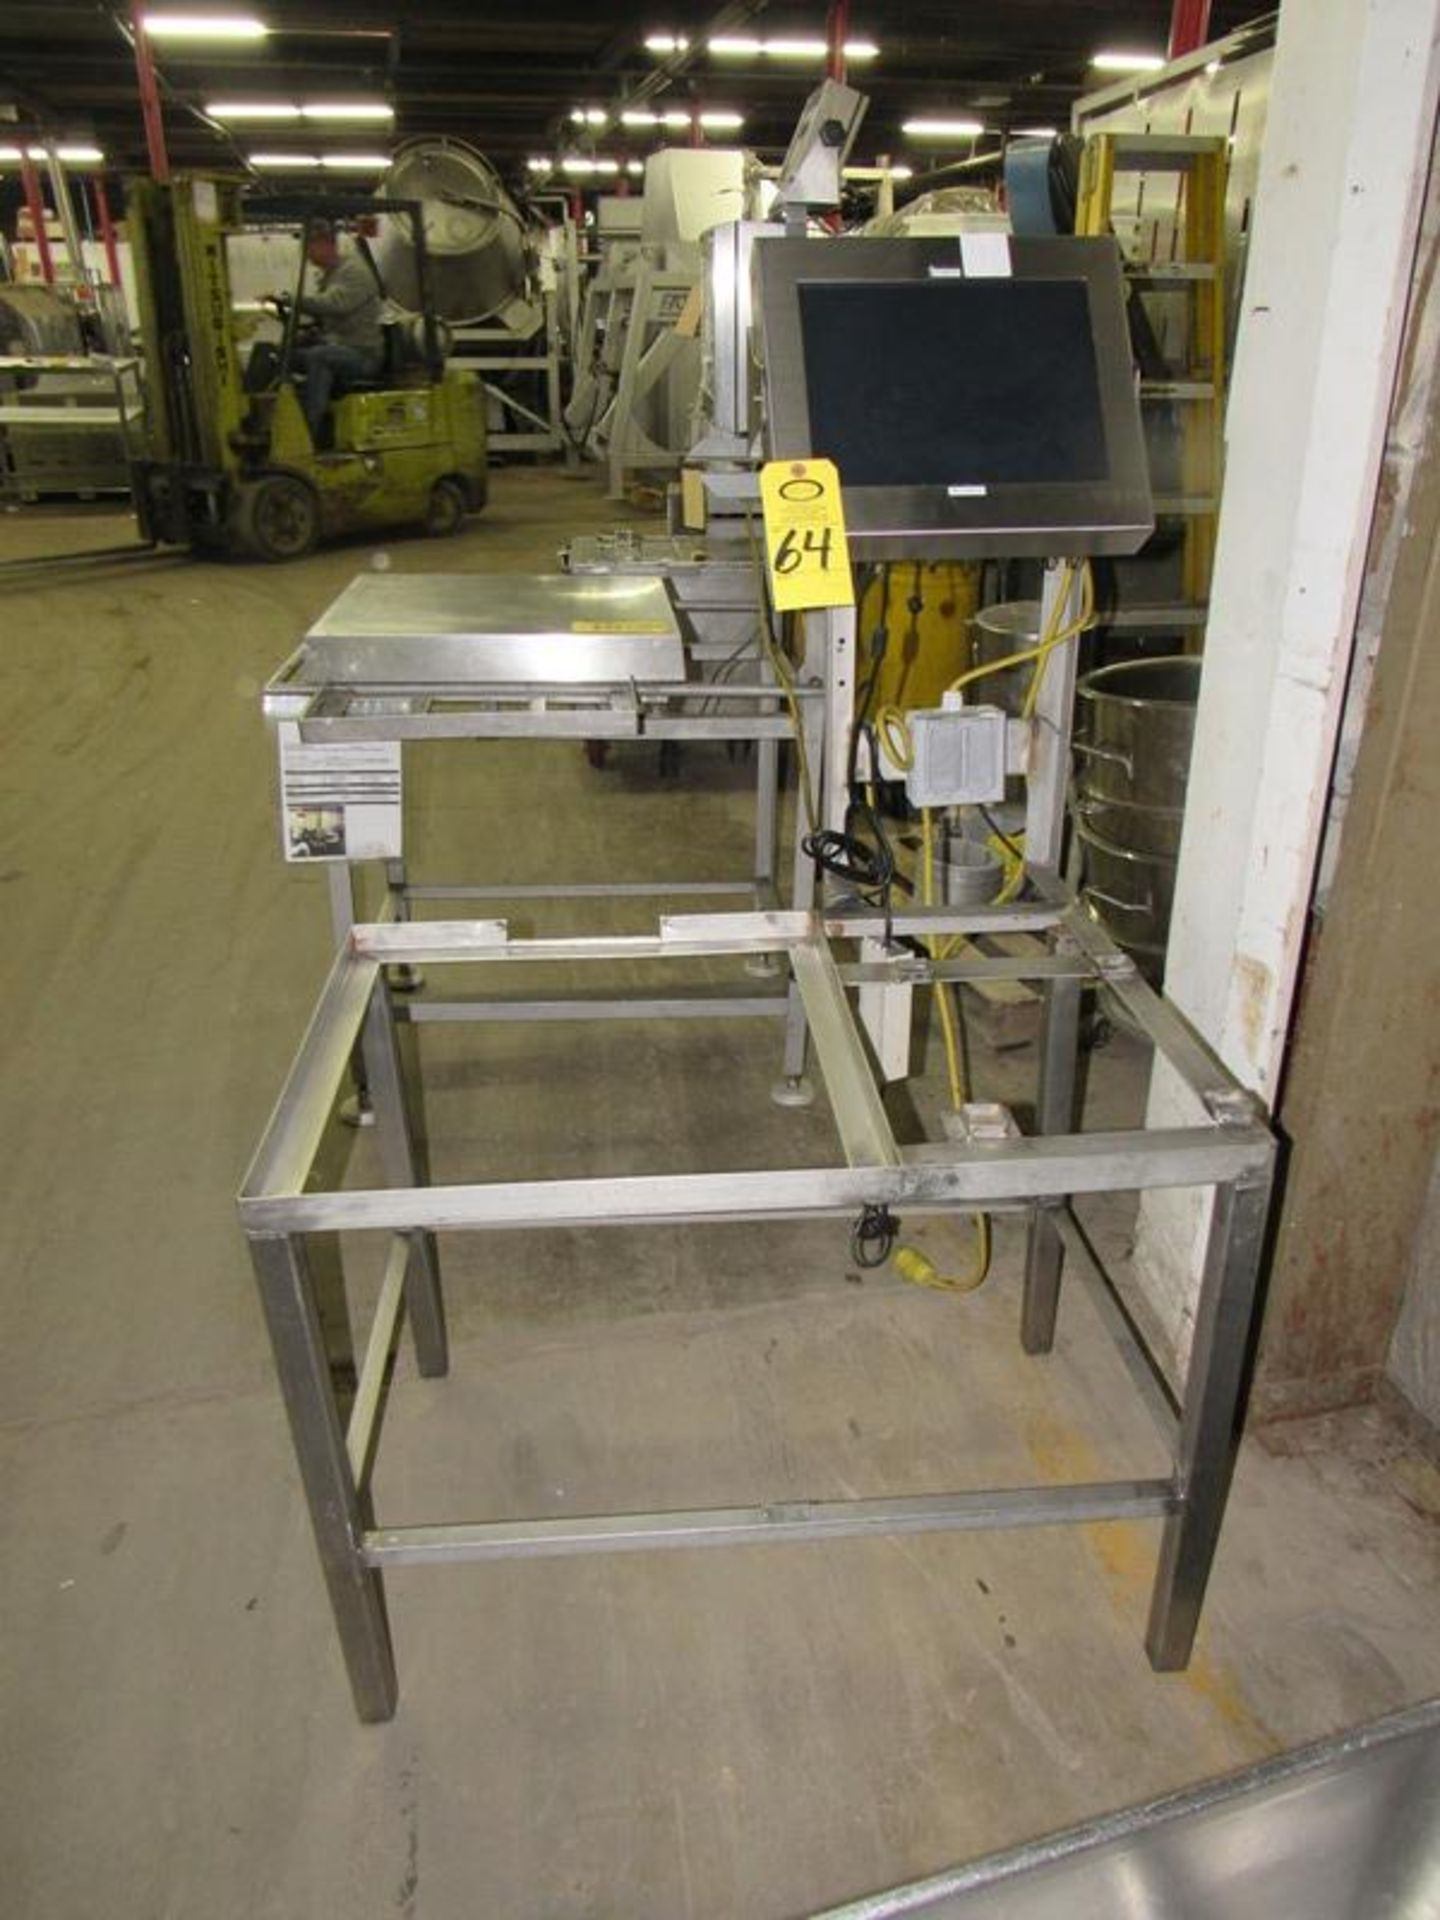 Stainless Steel Stand, 23" W X 3' L with monitor attached